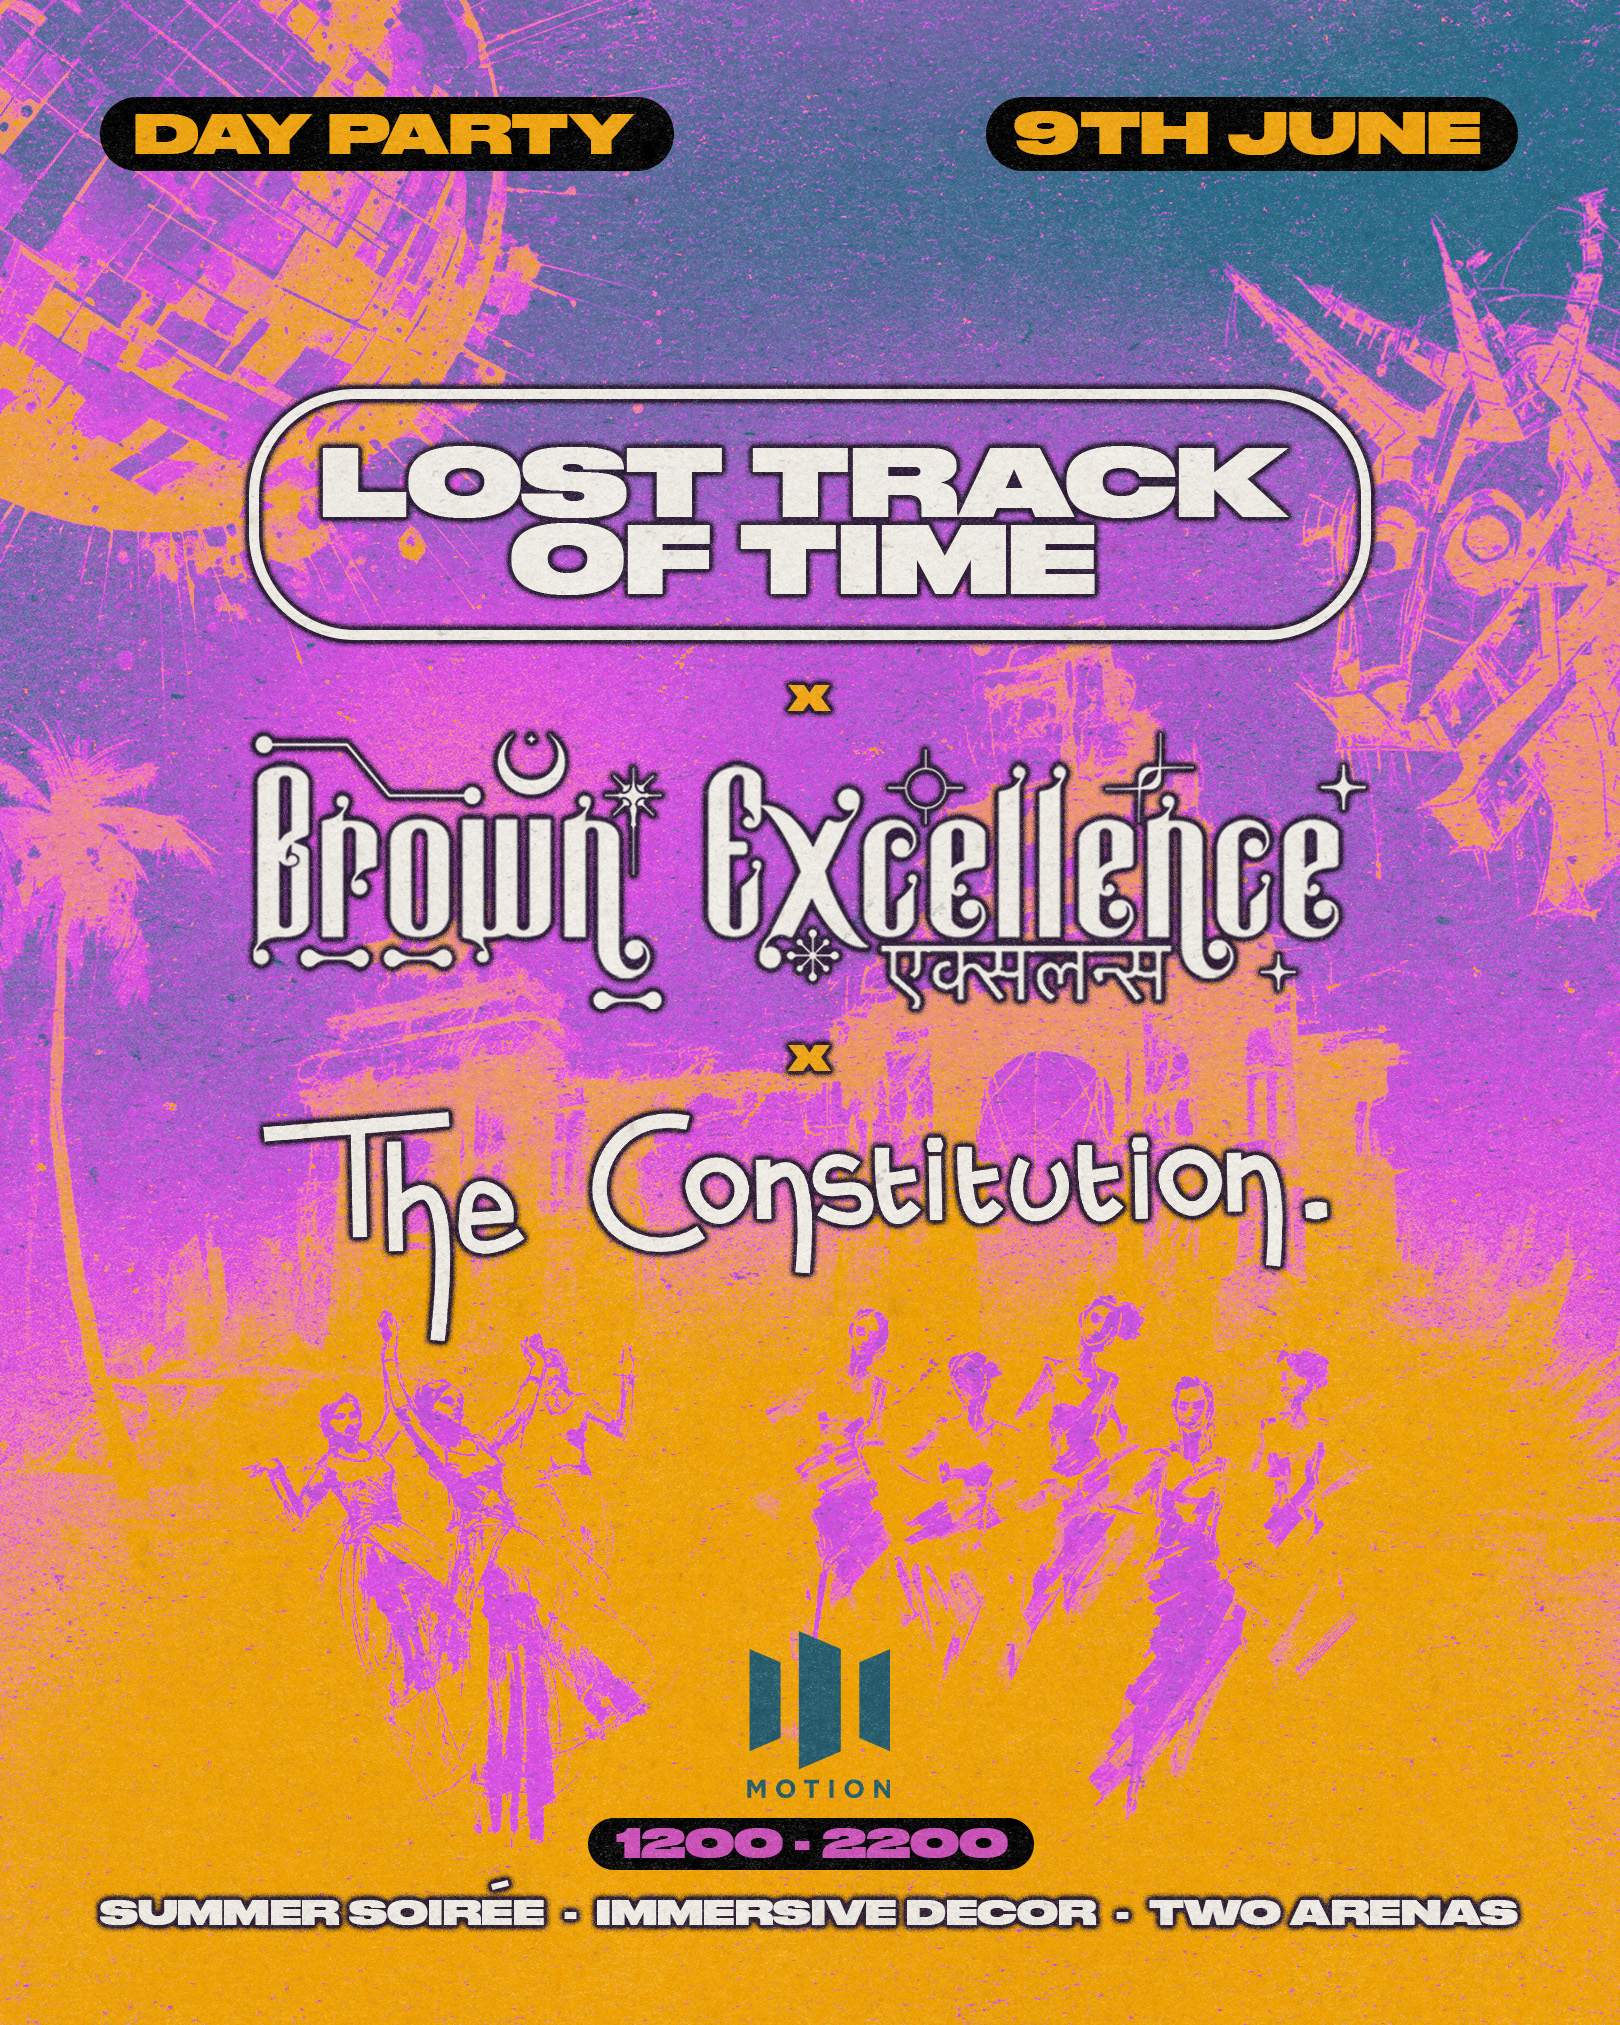 Lost Track of Time x Brown Excellence x The Constitution - Página trasera